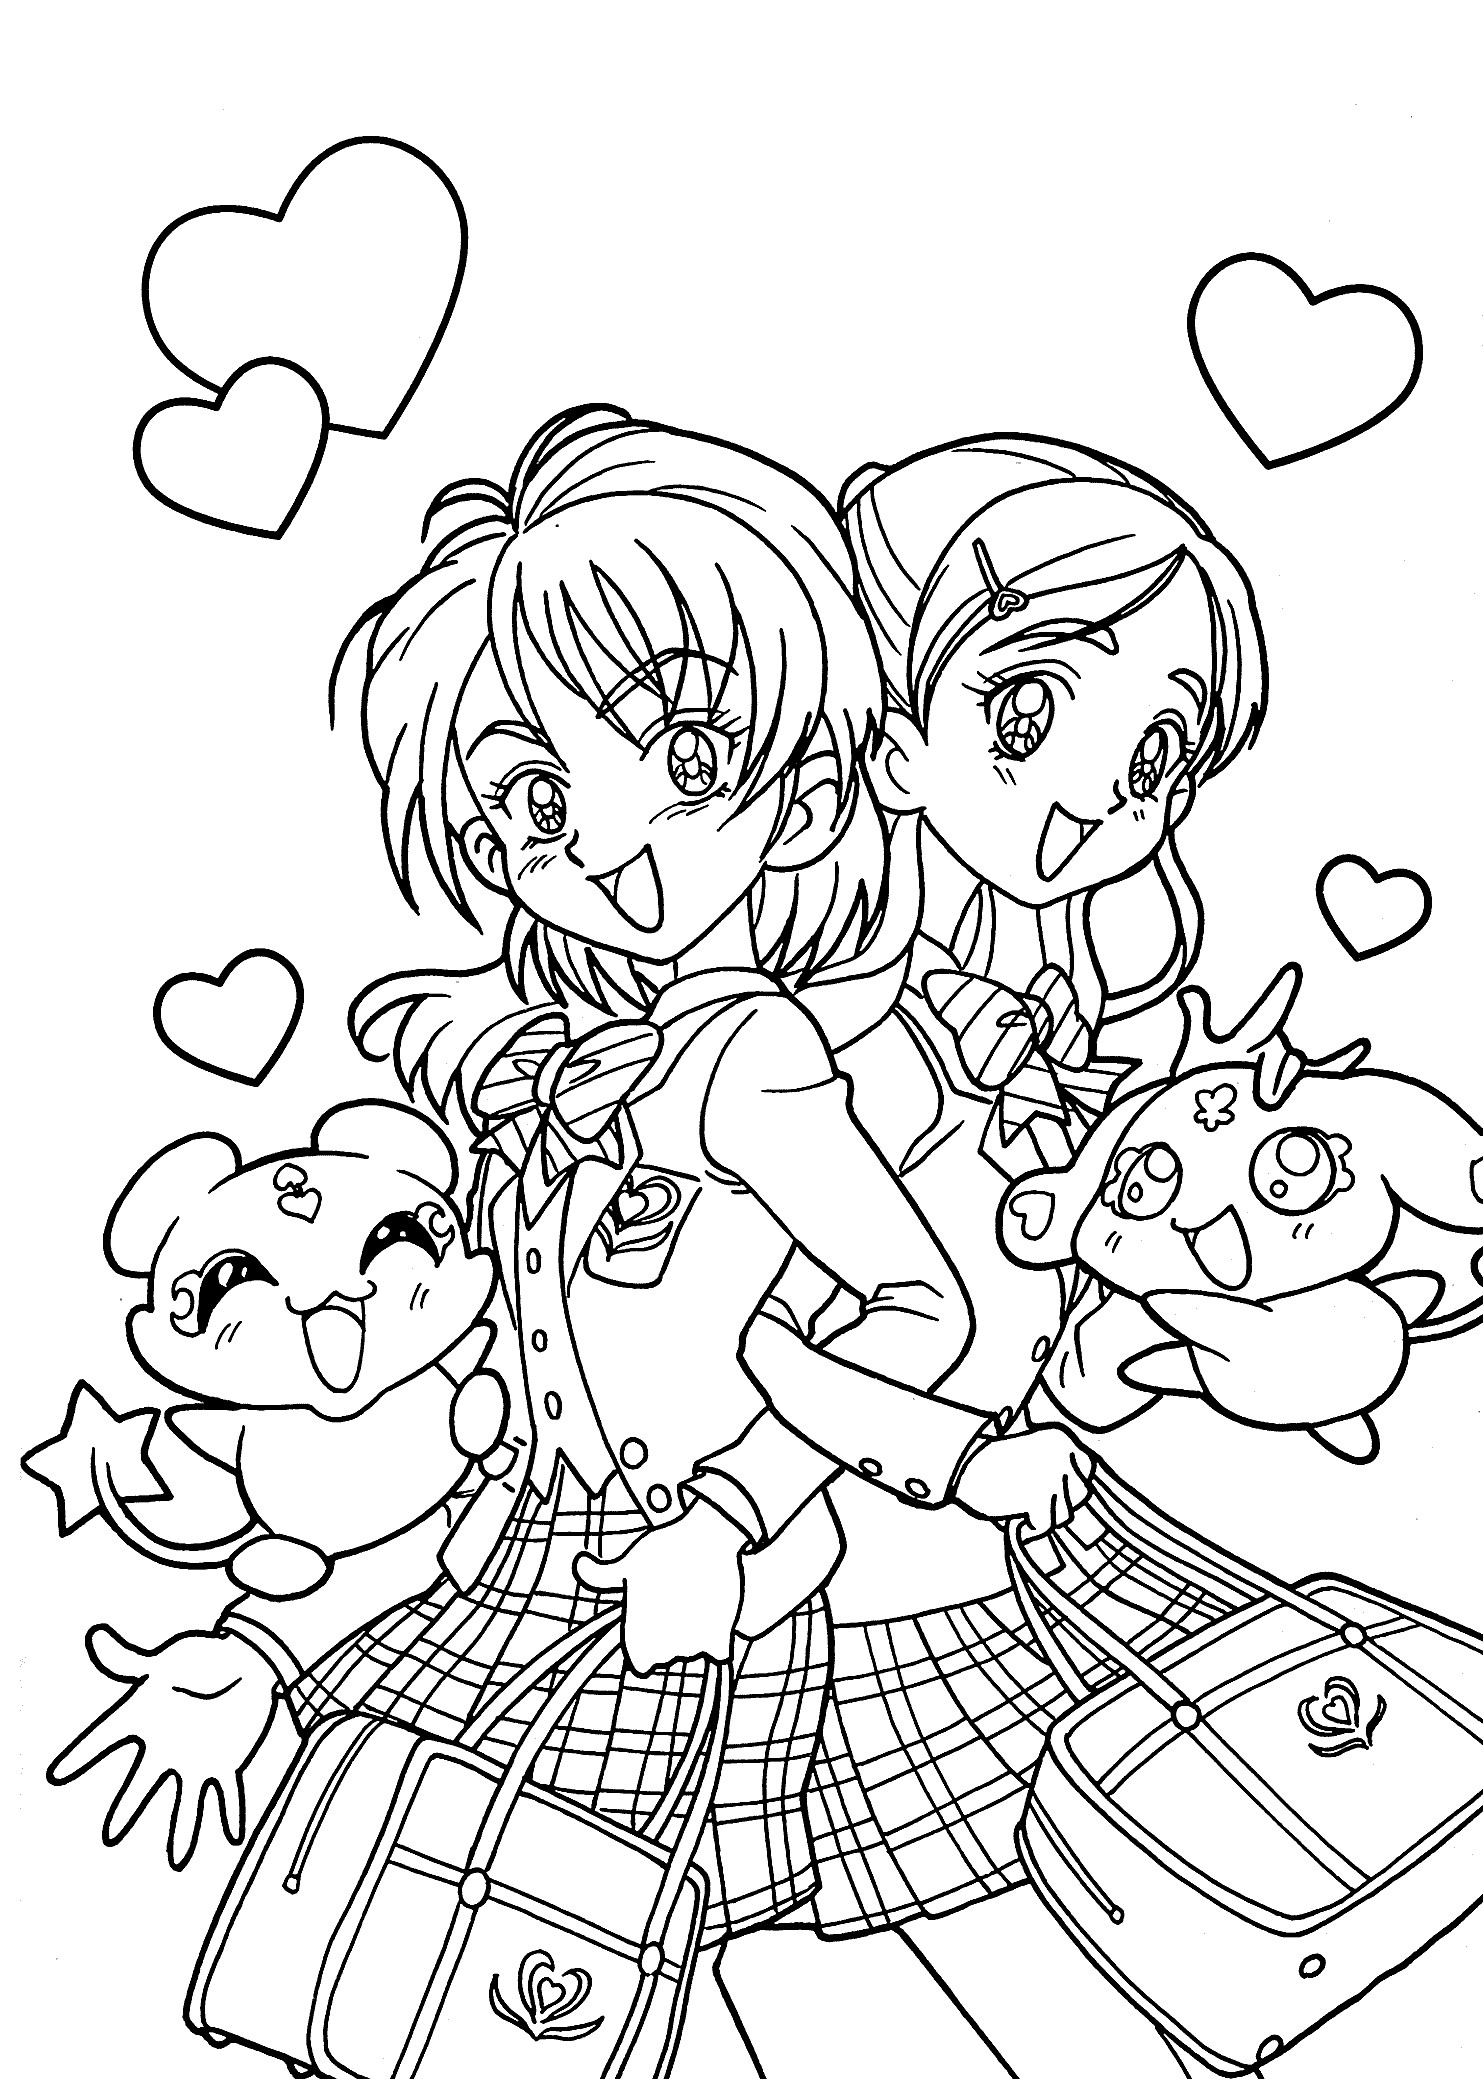 Girl Coloring Sheet
 Anime Girl Coloring Pages coloringsuite